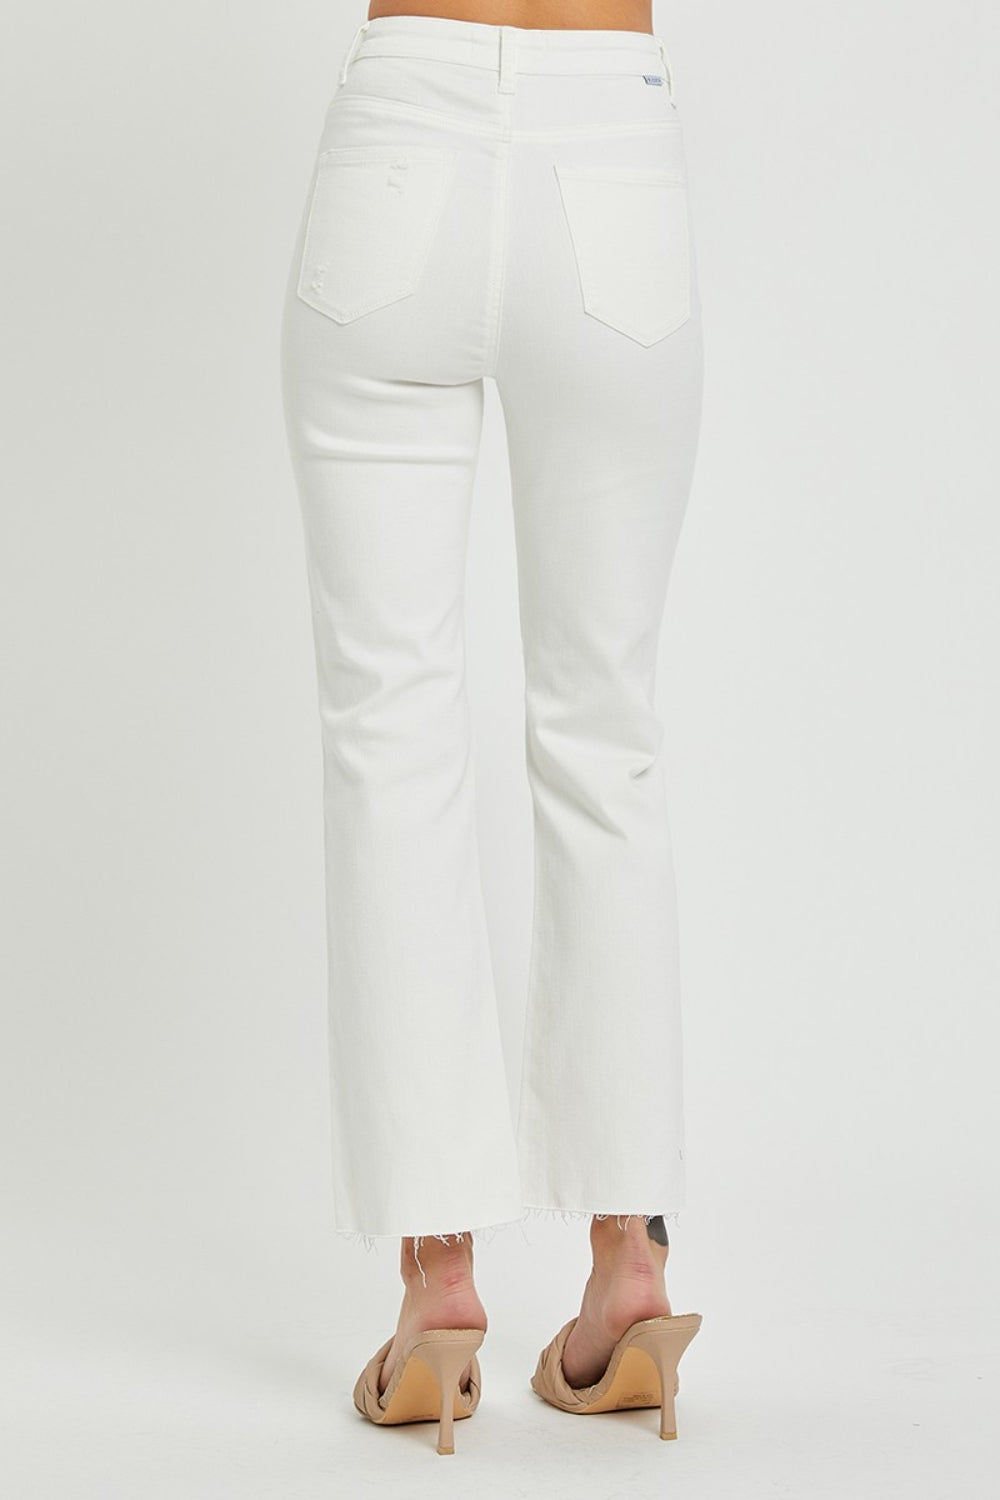 RISEN White High Rise Button Fly Straight Ankle Jeans Trendsi